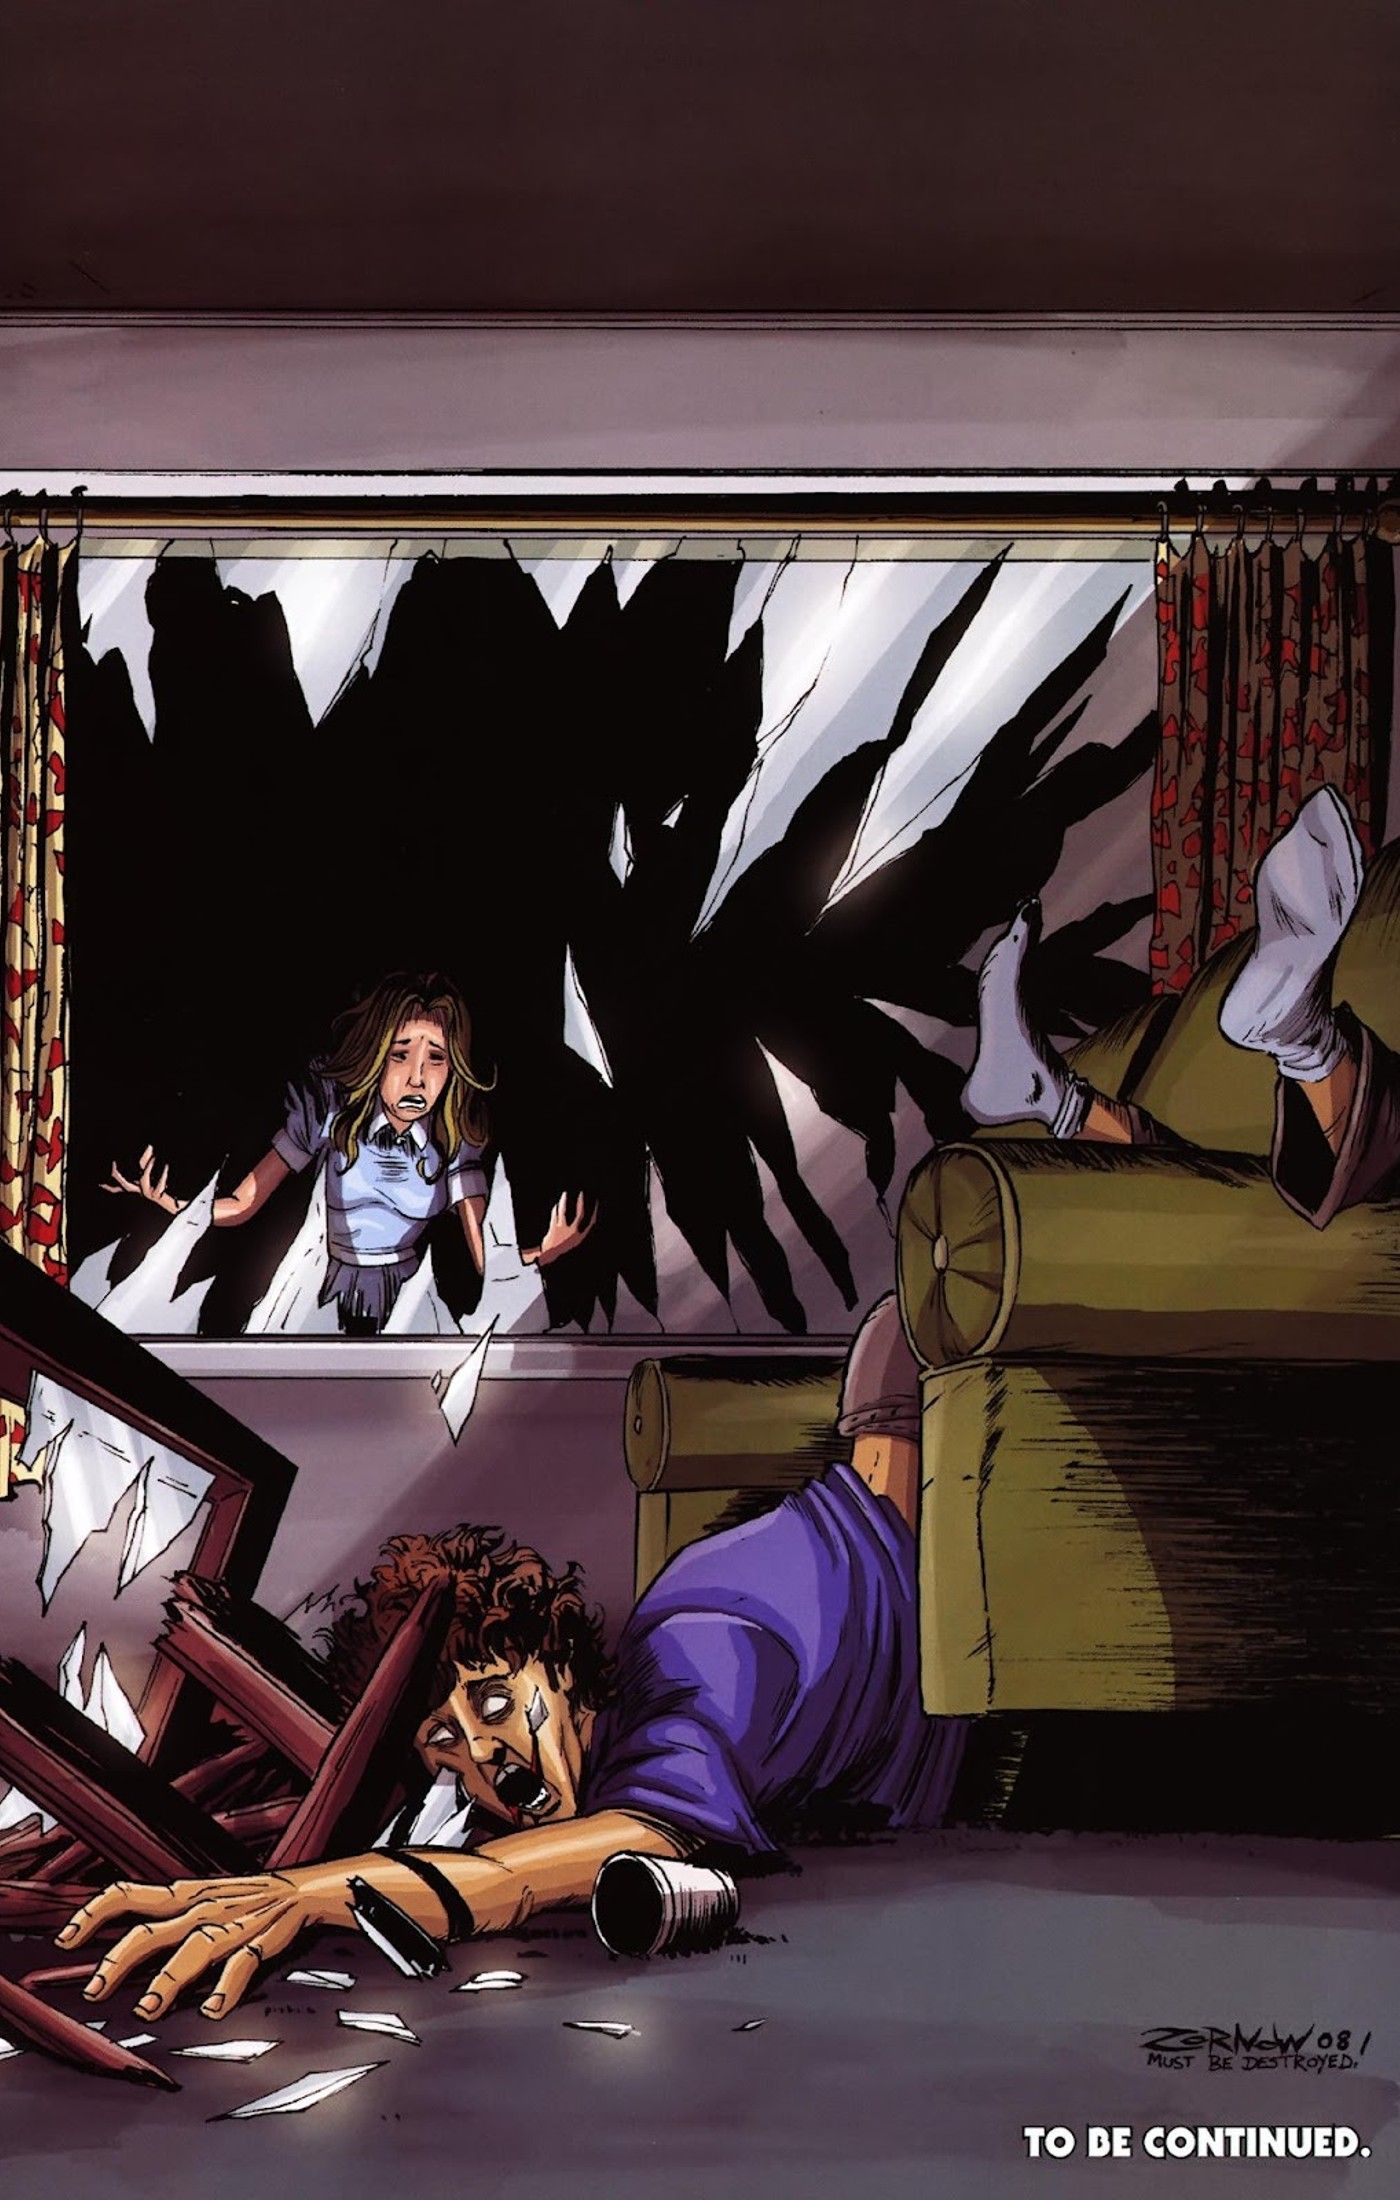 panel from Halloween The First Death of Laurie Strode #2, Laurie Strode finds Jimmy's dead body